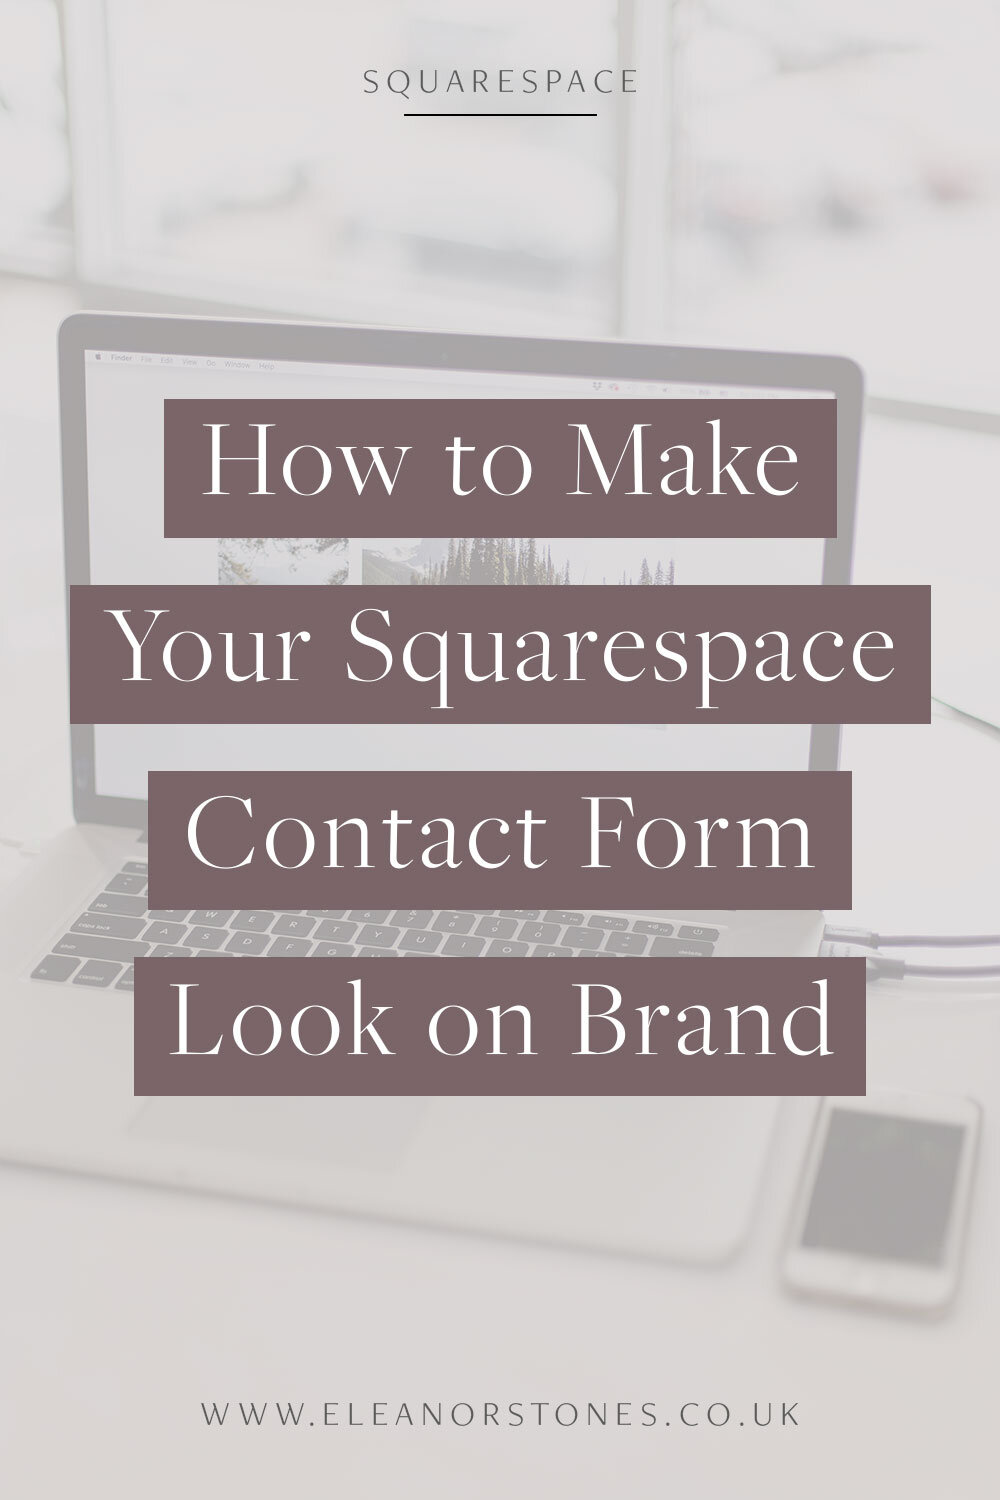 How to Make Your Squarespace Contact Form Look on Brand | Eleanor Stones